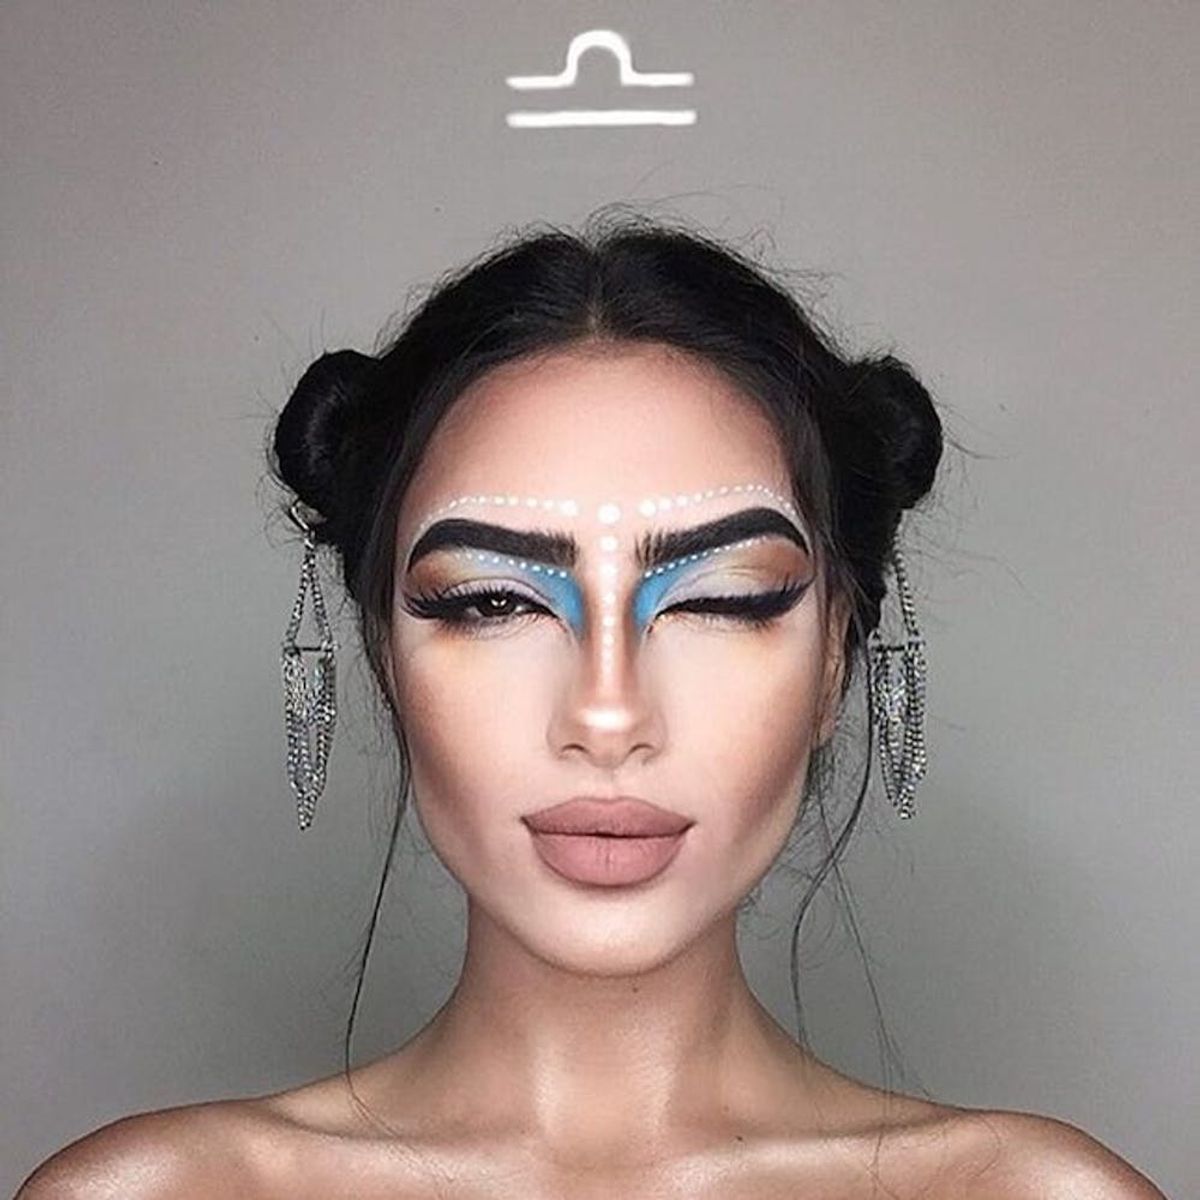 This Makeup Artist Created Stunning Astrology Beauty Looks for Each Zodiac Sign